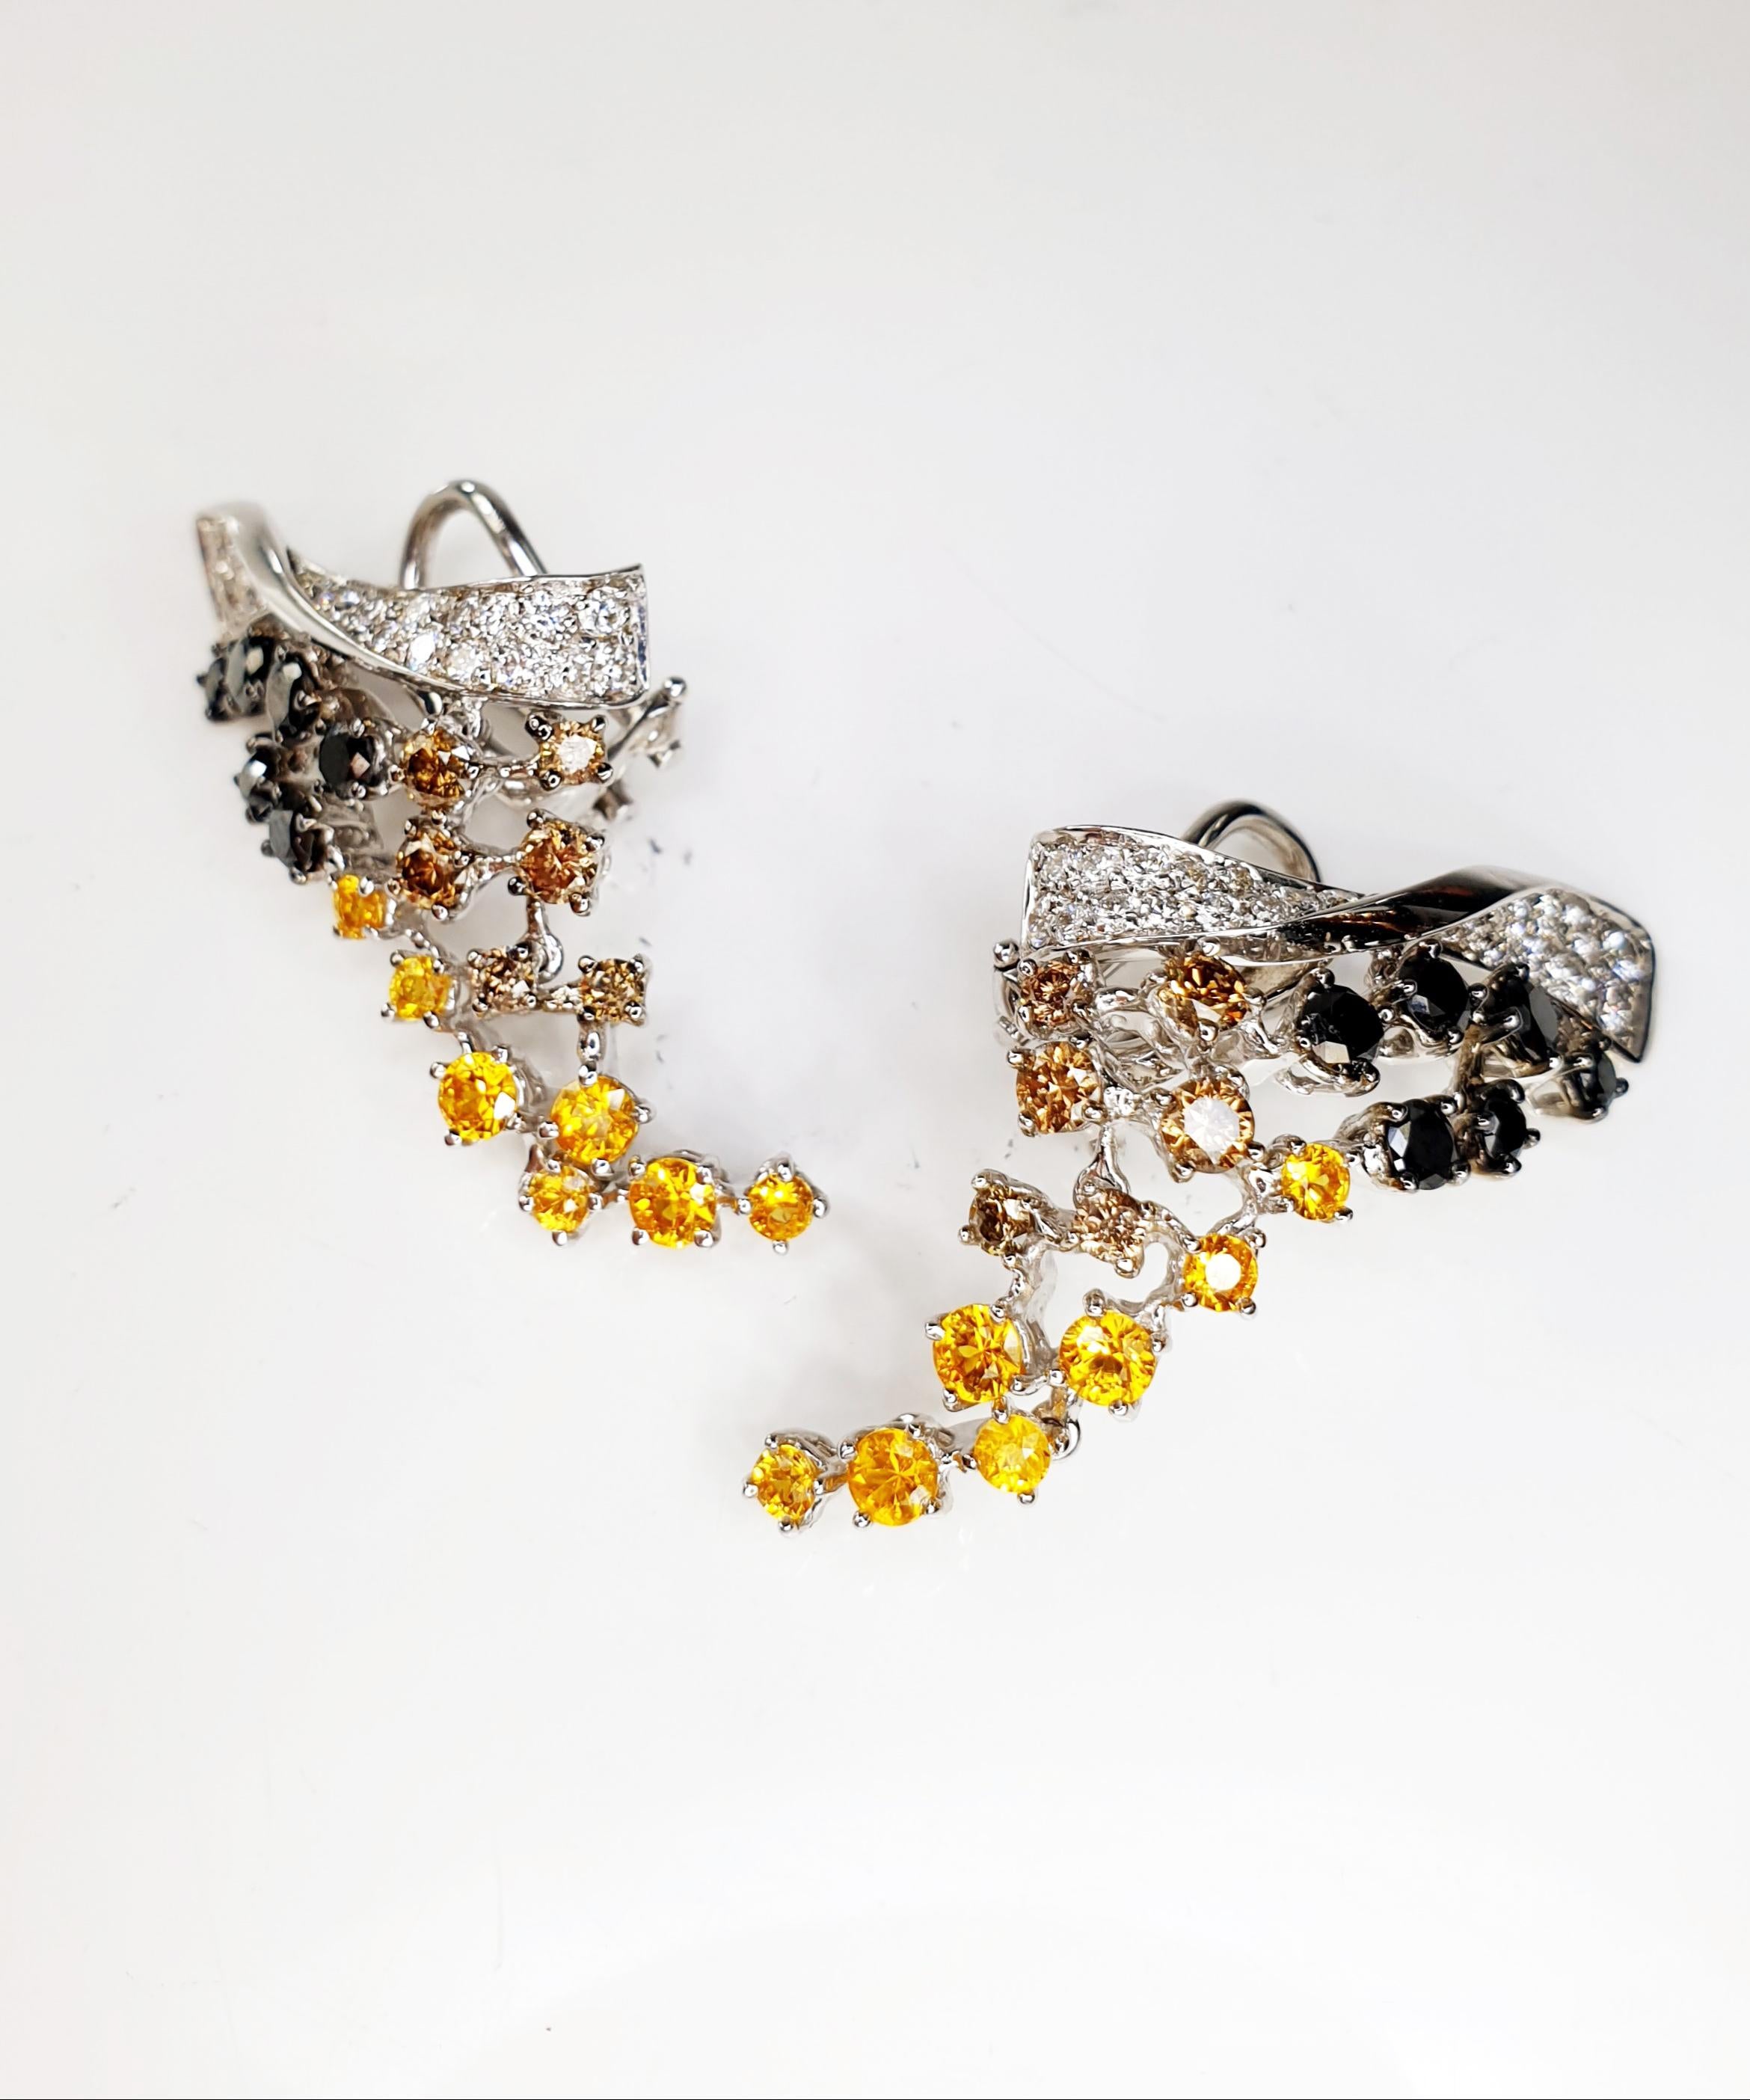 Contemporary Cascade Earrings 18 Karat White with Three Color Diamonds and Citrines